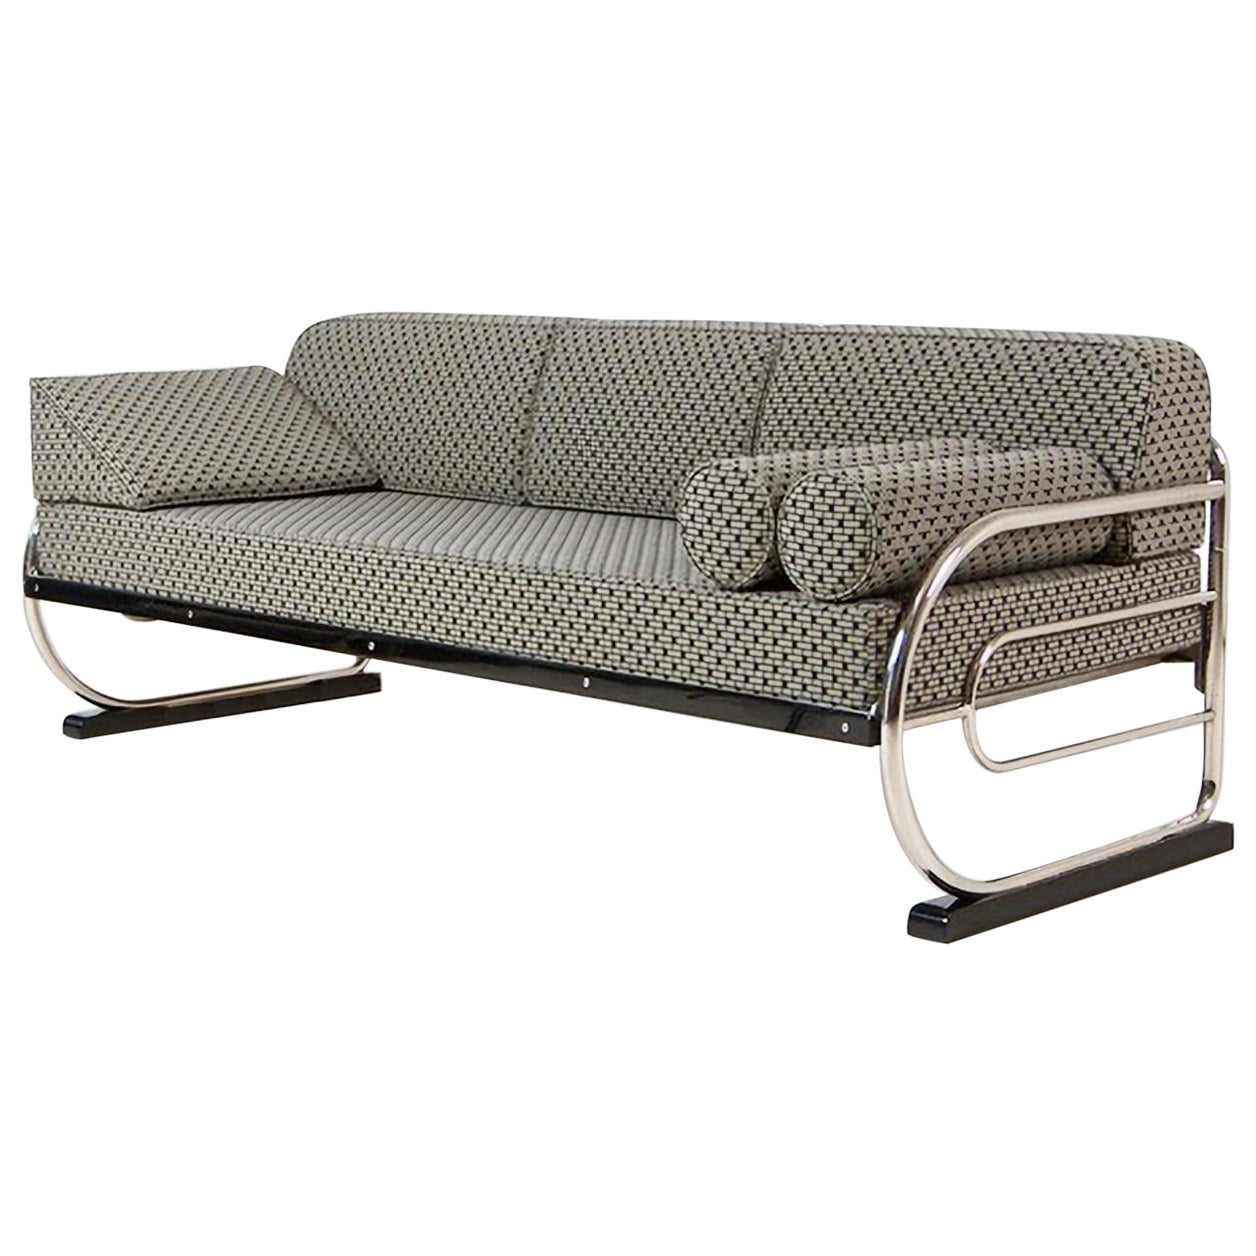 Modernist Tubular Steel Couch/ Daybed, Chromed Metal, Fabric Upholstery, c. 1930 For Sale